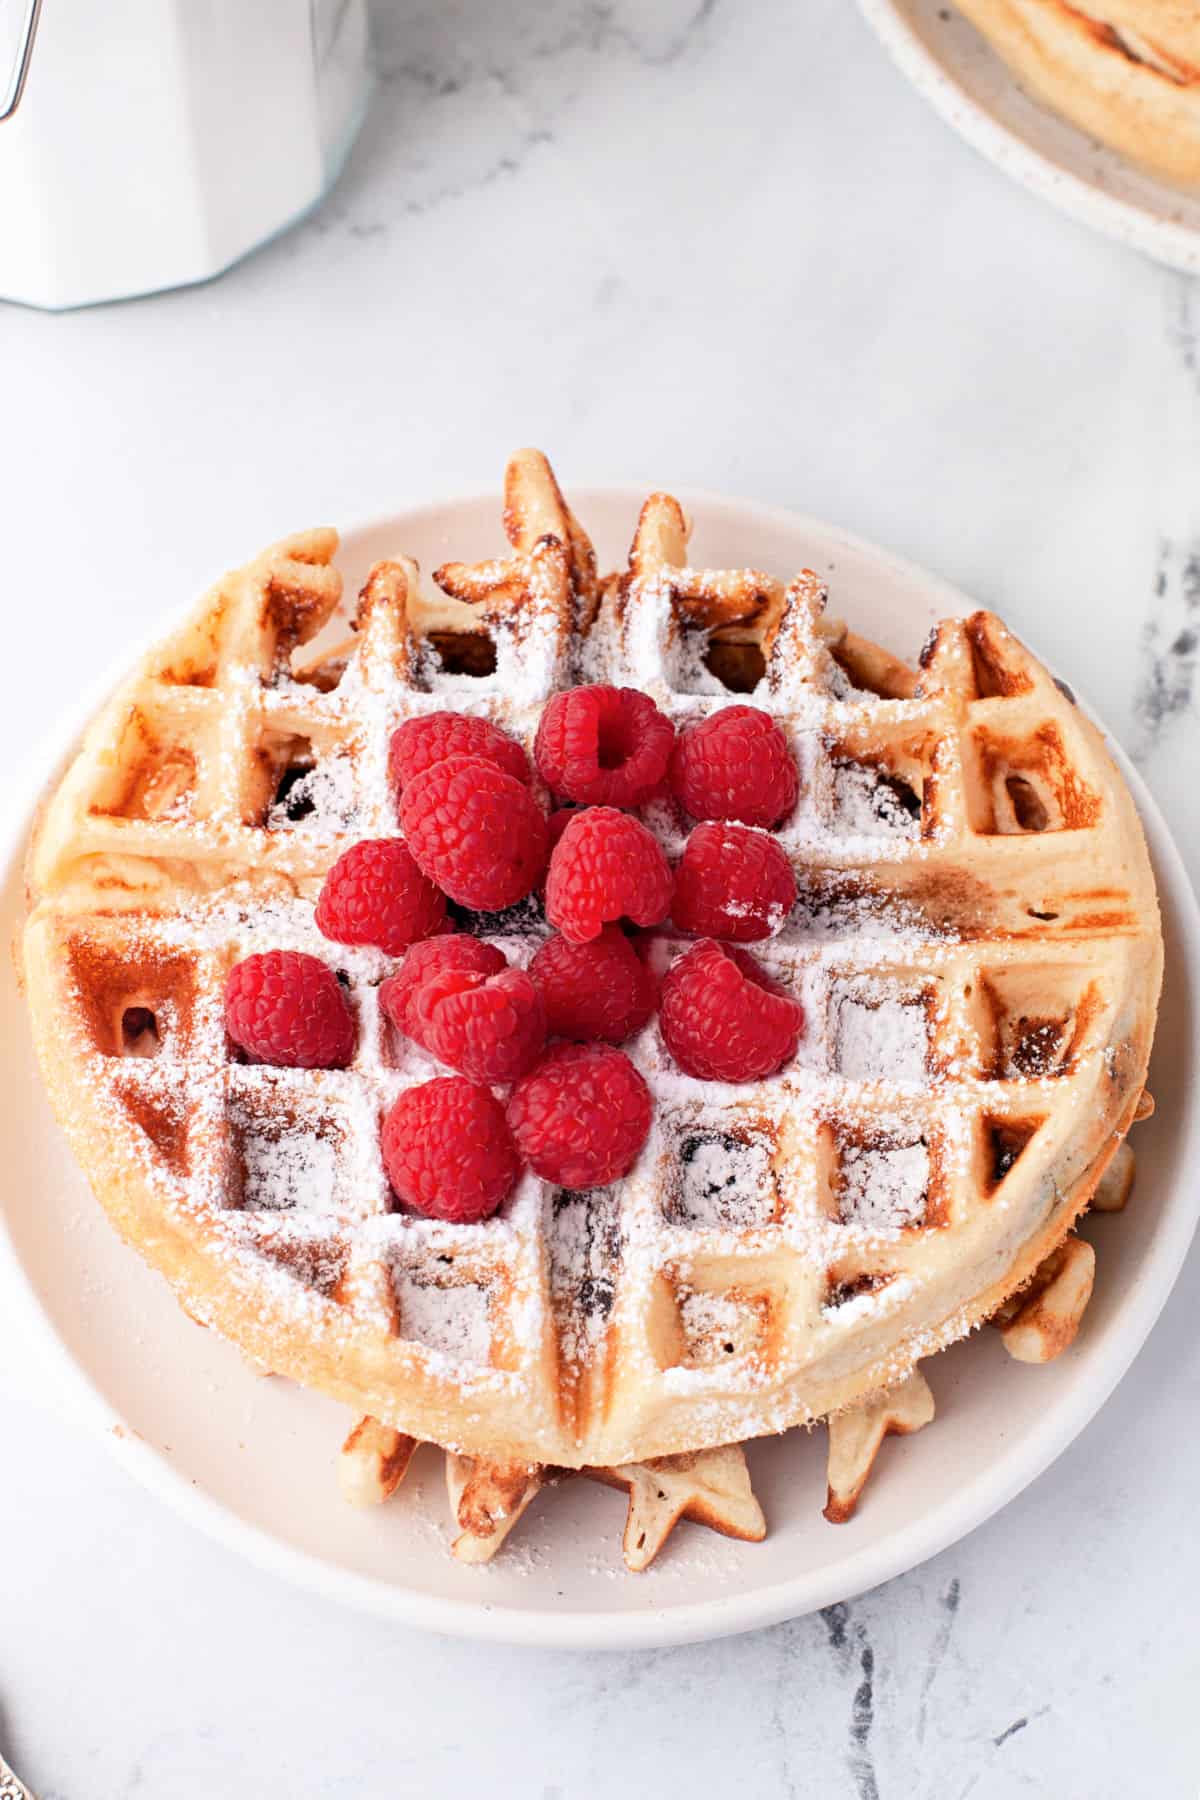 Stack of two chocolate chip waffles topped with fresh raspberries.